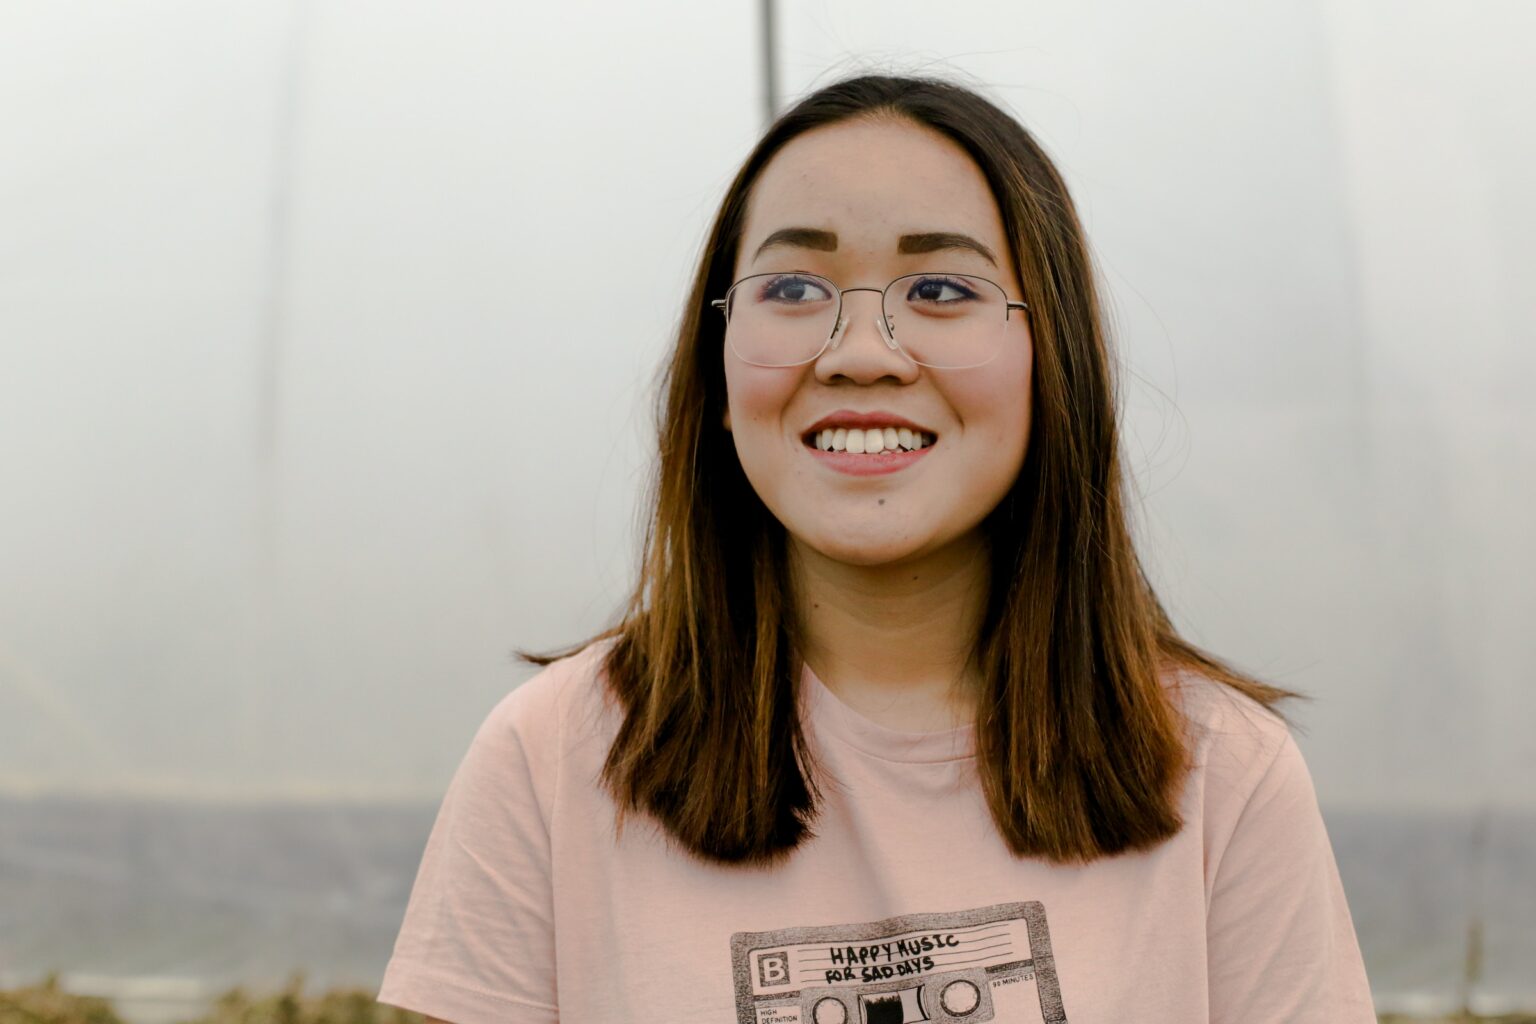 Young woman with glasses smiling outdoors after her visit to the Dallas dental office.